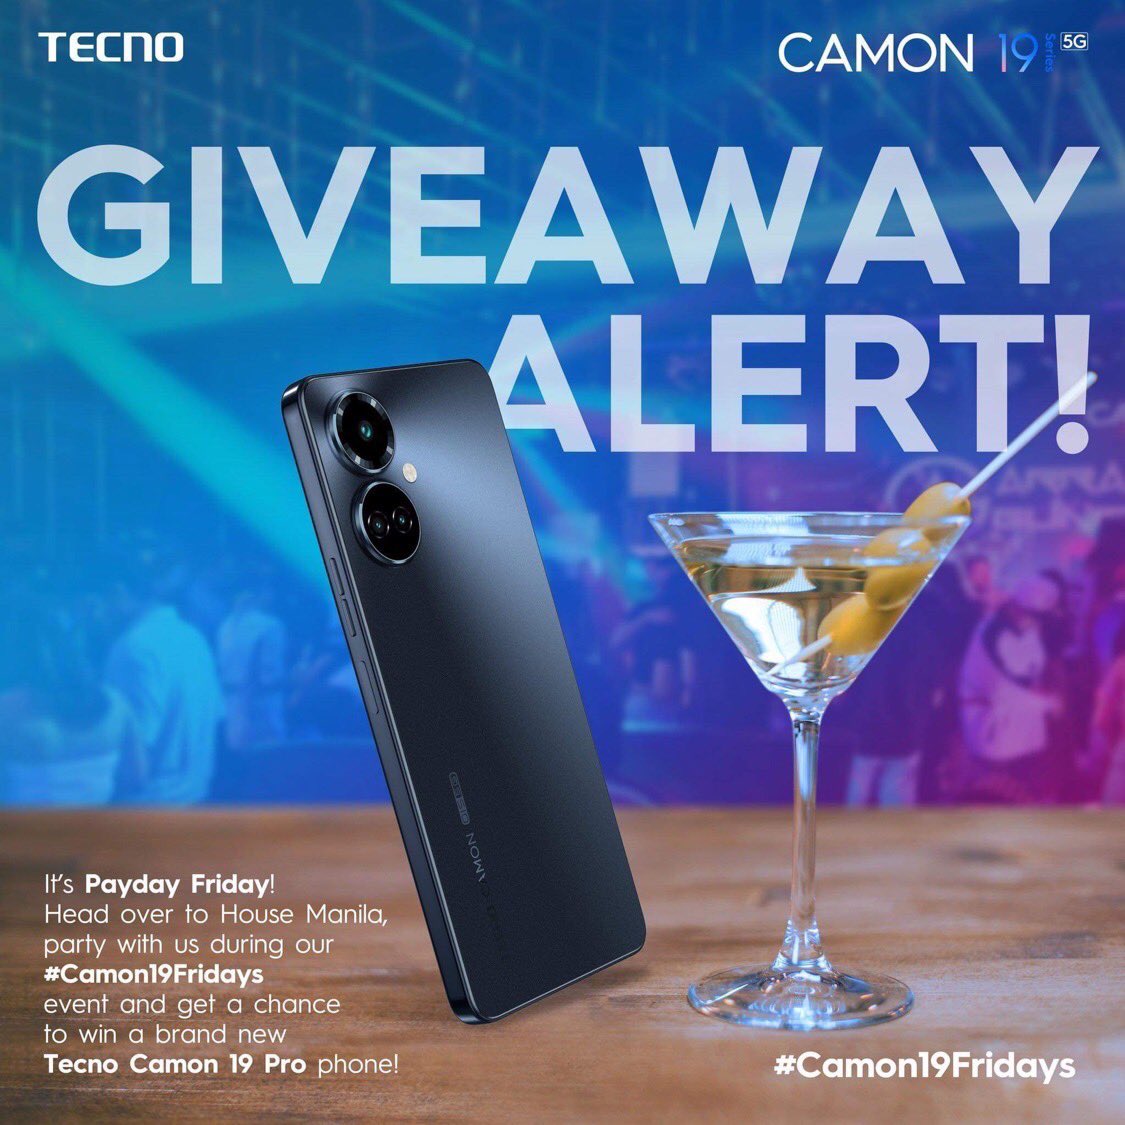 Ackk!! 😍😍 It’s #Camon19Fridays wave 1 finale! And we’re giving away a brand new TECNO Camon 19 Pro at House Manila tonight! Check out @tecnomobileph’s account for more details! Plus points pagnaka-Tecno 😉✨ #YouLookSoGoodTonight